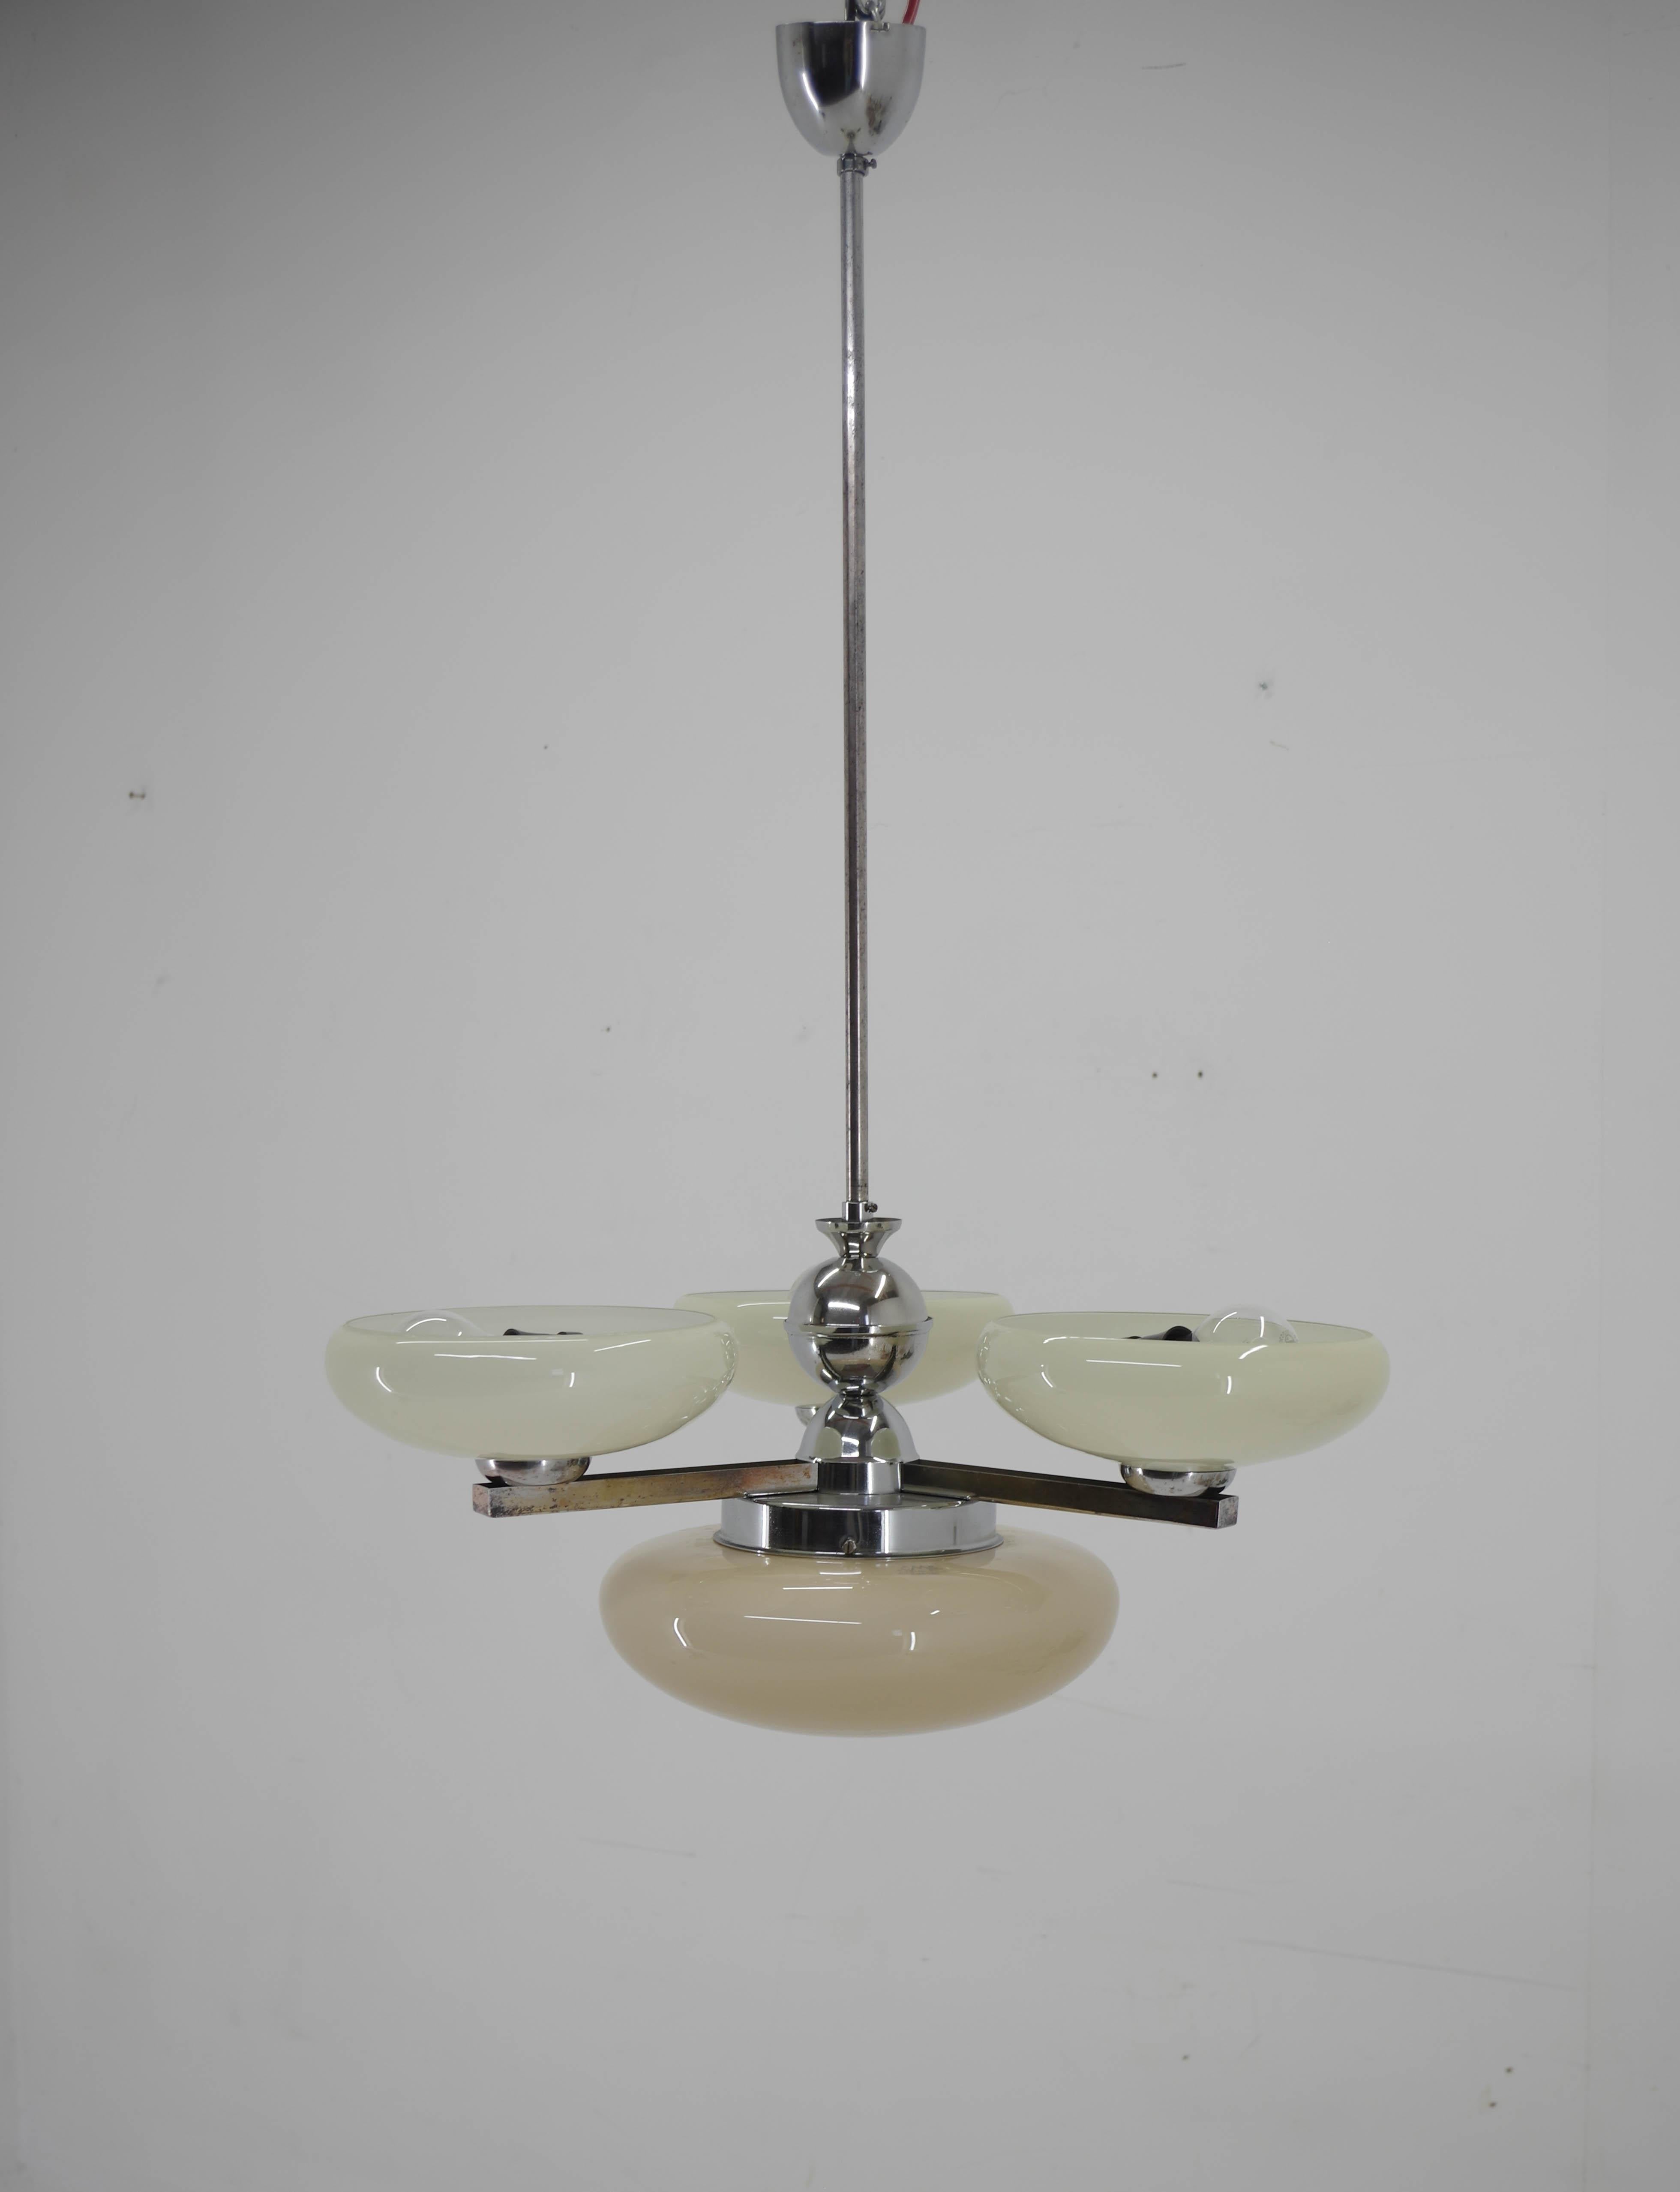 4-flamming Art Deco chandelier.
Blown glass shades - bottom glass is marked and has a slightly different color.
Chrome with age patina
Rewired: two separate circuits - 3+1x40W, E25-E27 bulbs
US wiring compatible